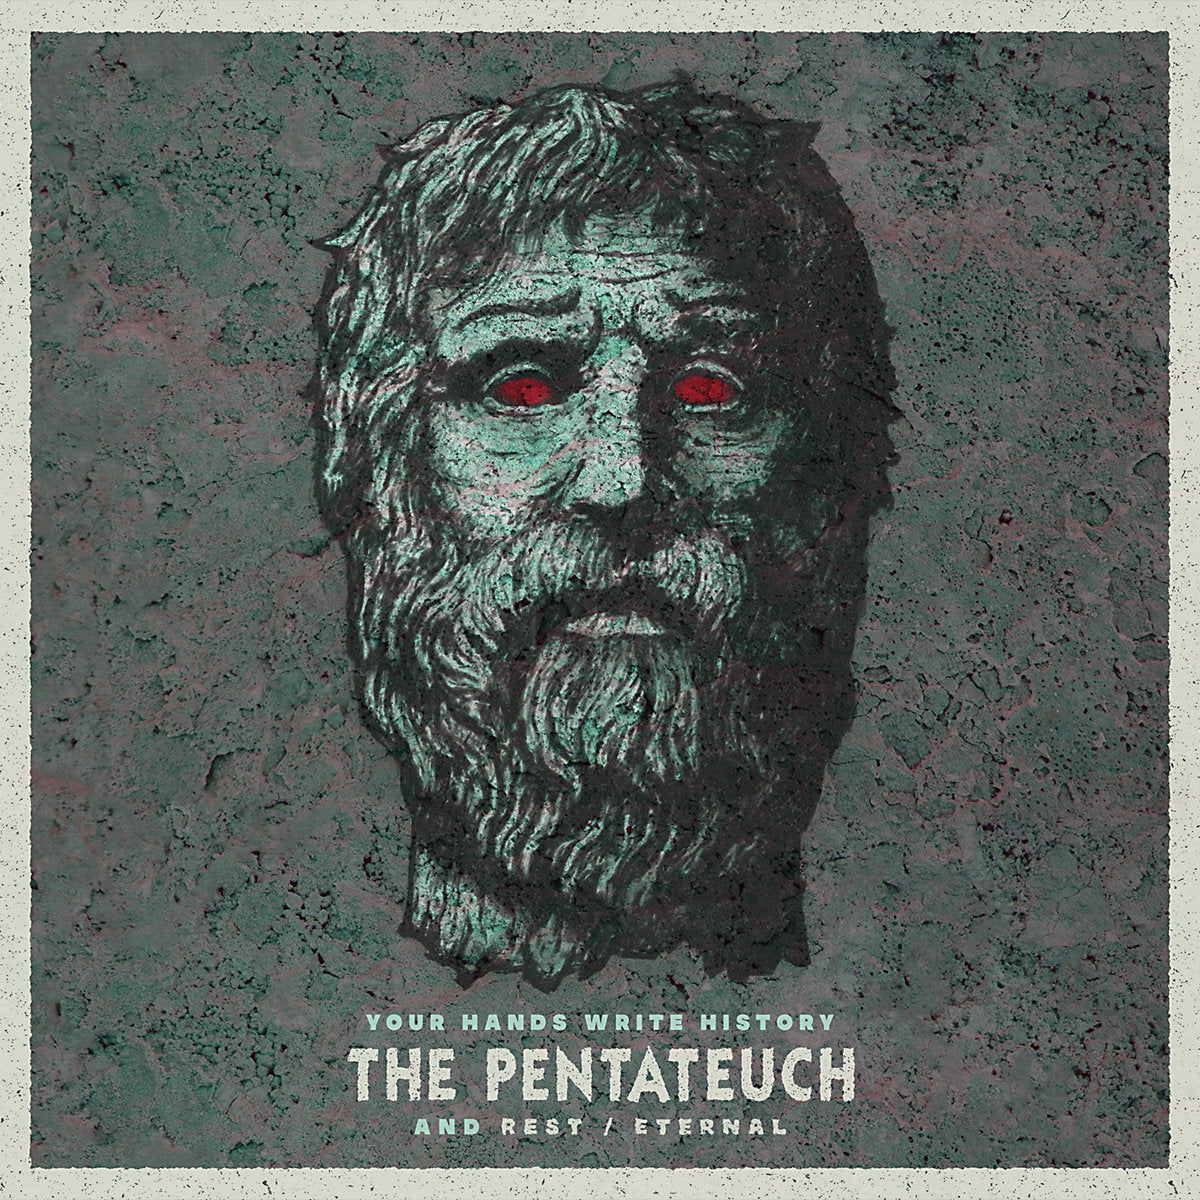 THE PENTATEUCH & REST / ETERNAL "Your Hands Write History" LP